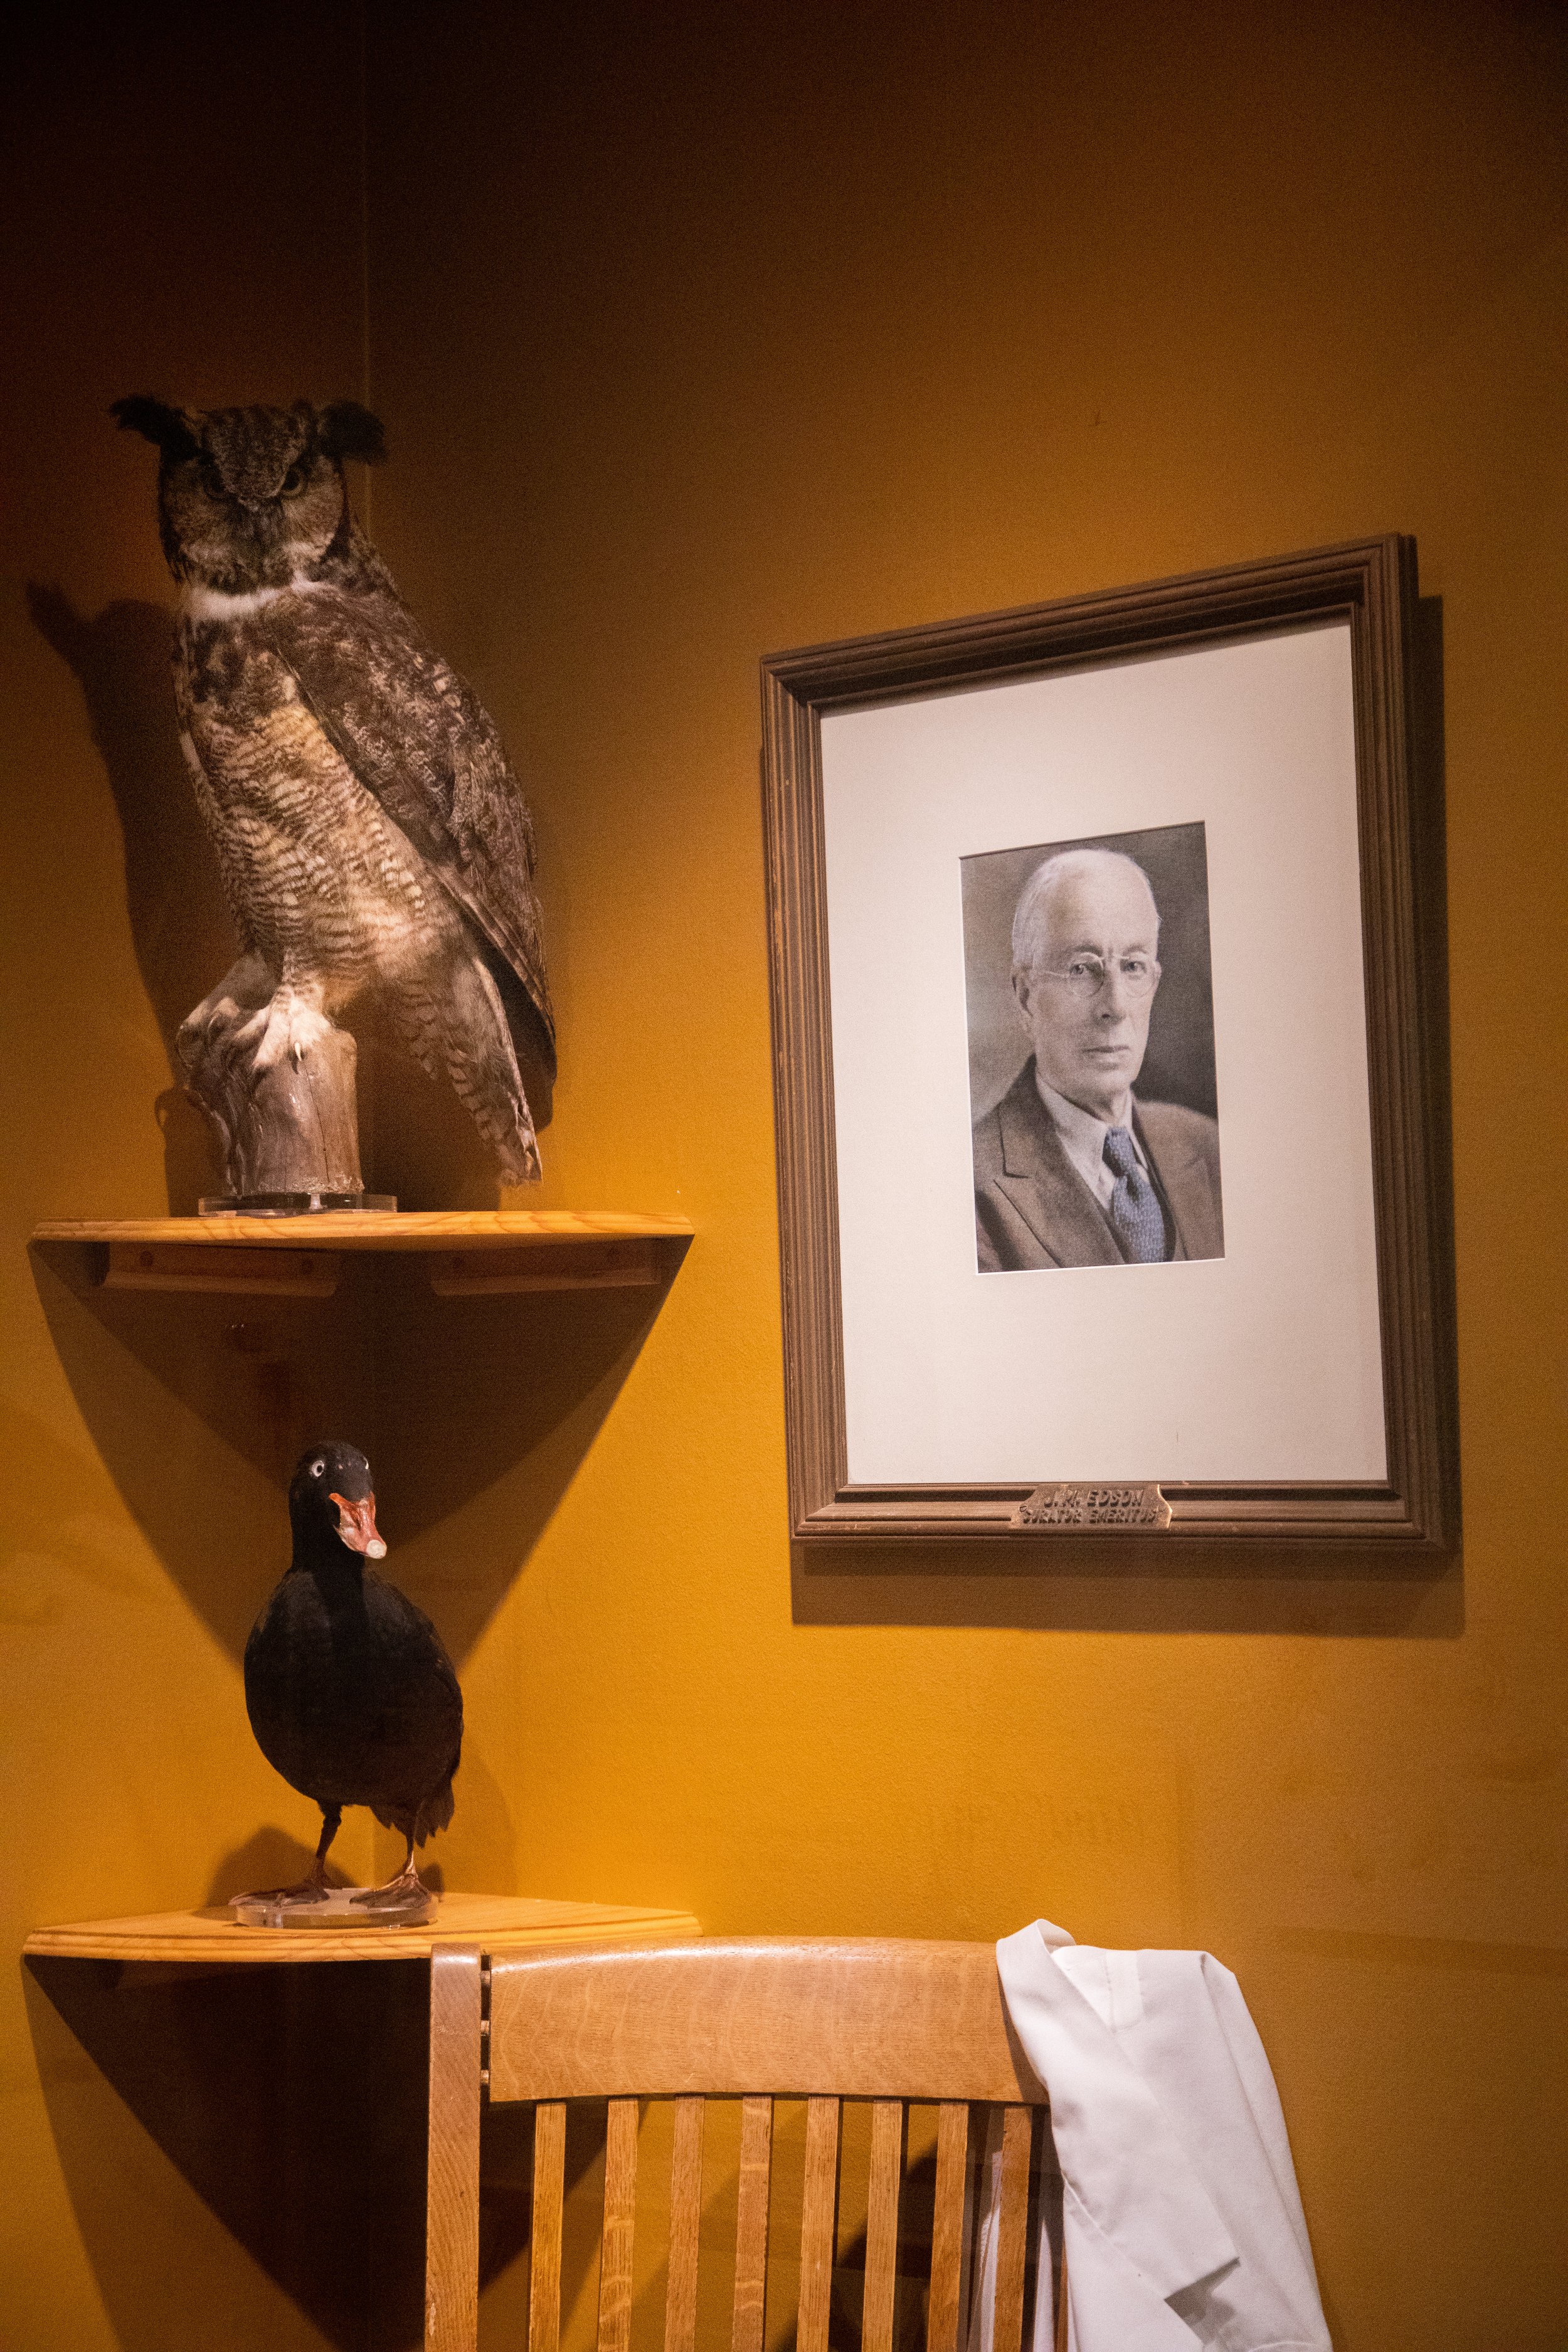  A portrait of John Edson, ornithologist and one of the collectors of the John Edson Hall of Birds exhibit at Whatcom Museum, pictured with a great horned owl and a scoter. // Photo by Emily Davis 